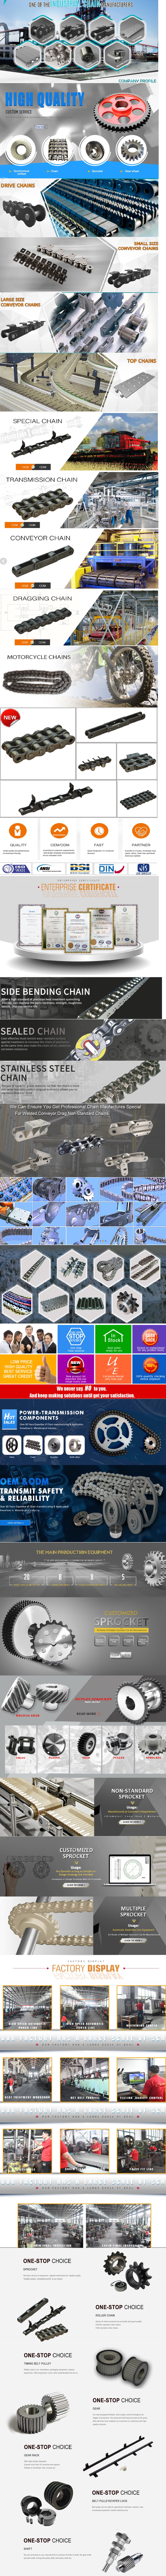 Industrial  made in China - replacement parts -  in Aracaju Brazil  Conveyor Large Roller Chain Steel professional Chain Factory Supply with ce certificate top quality low price